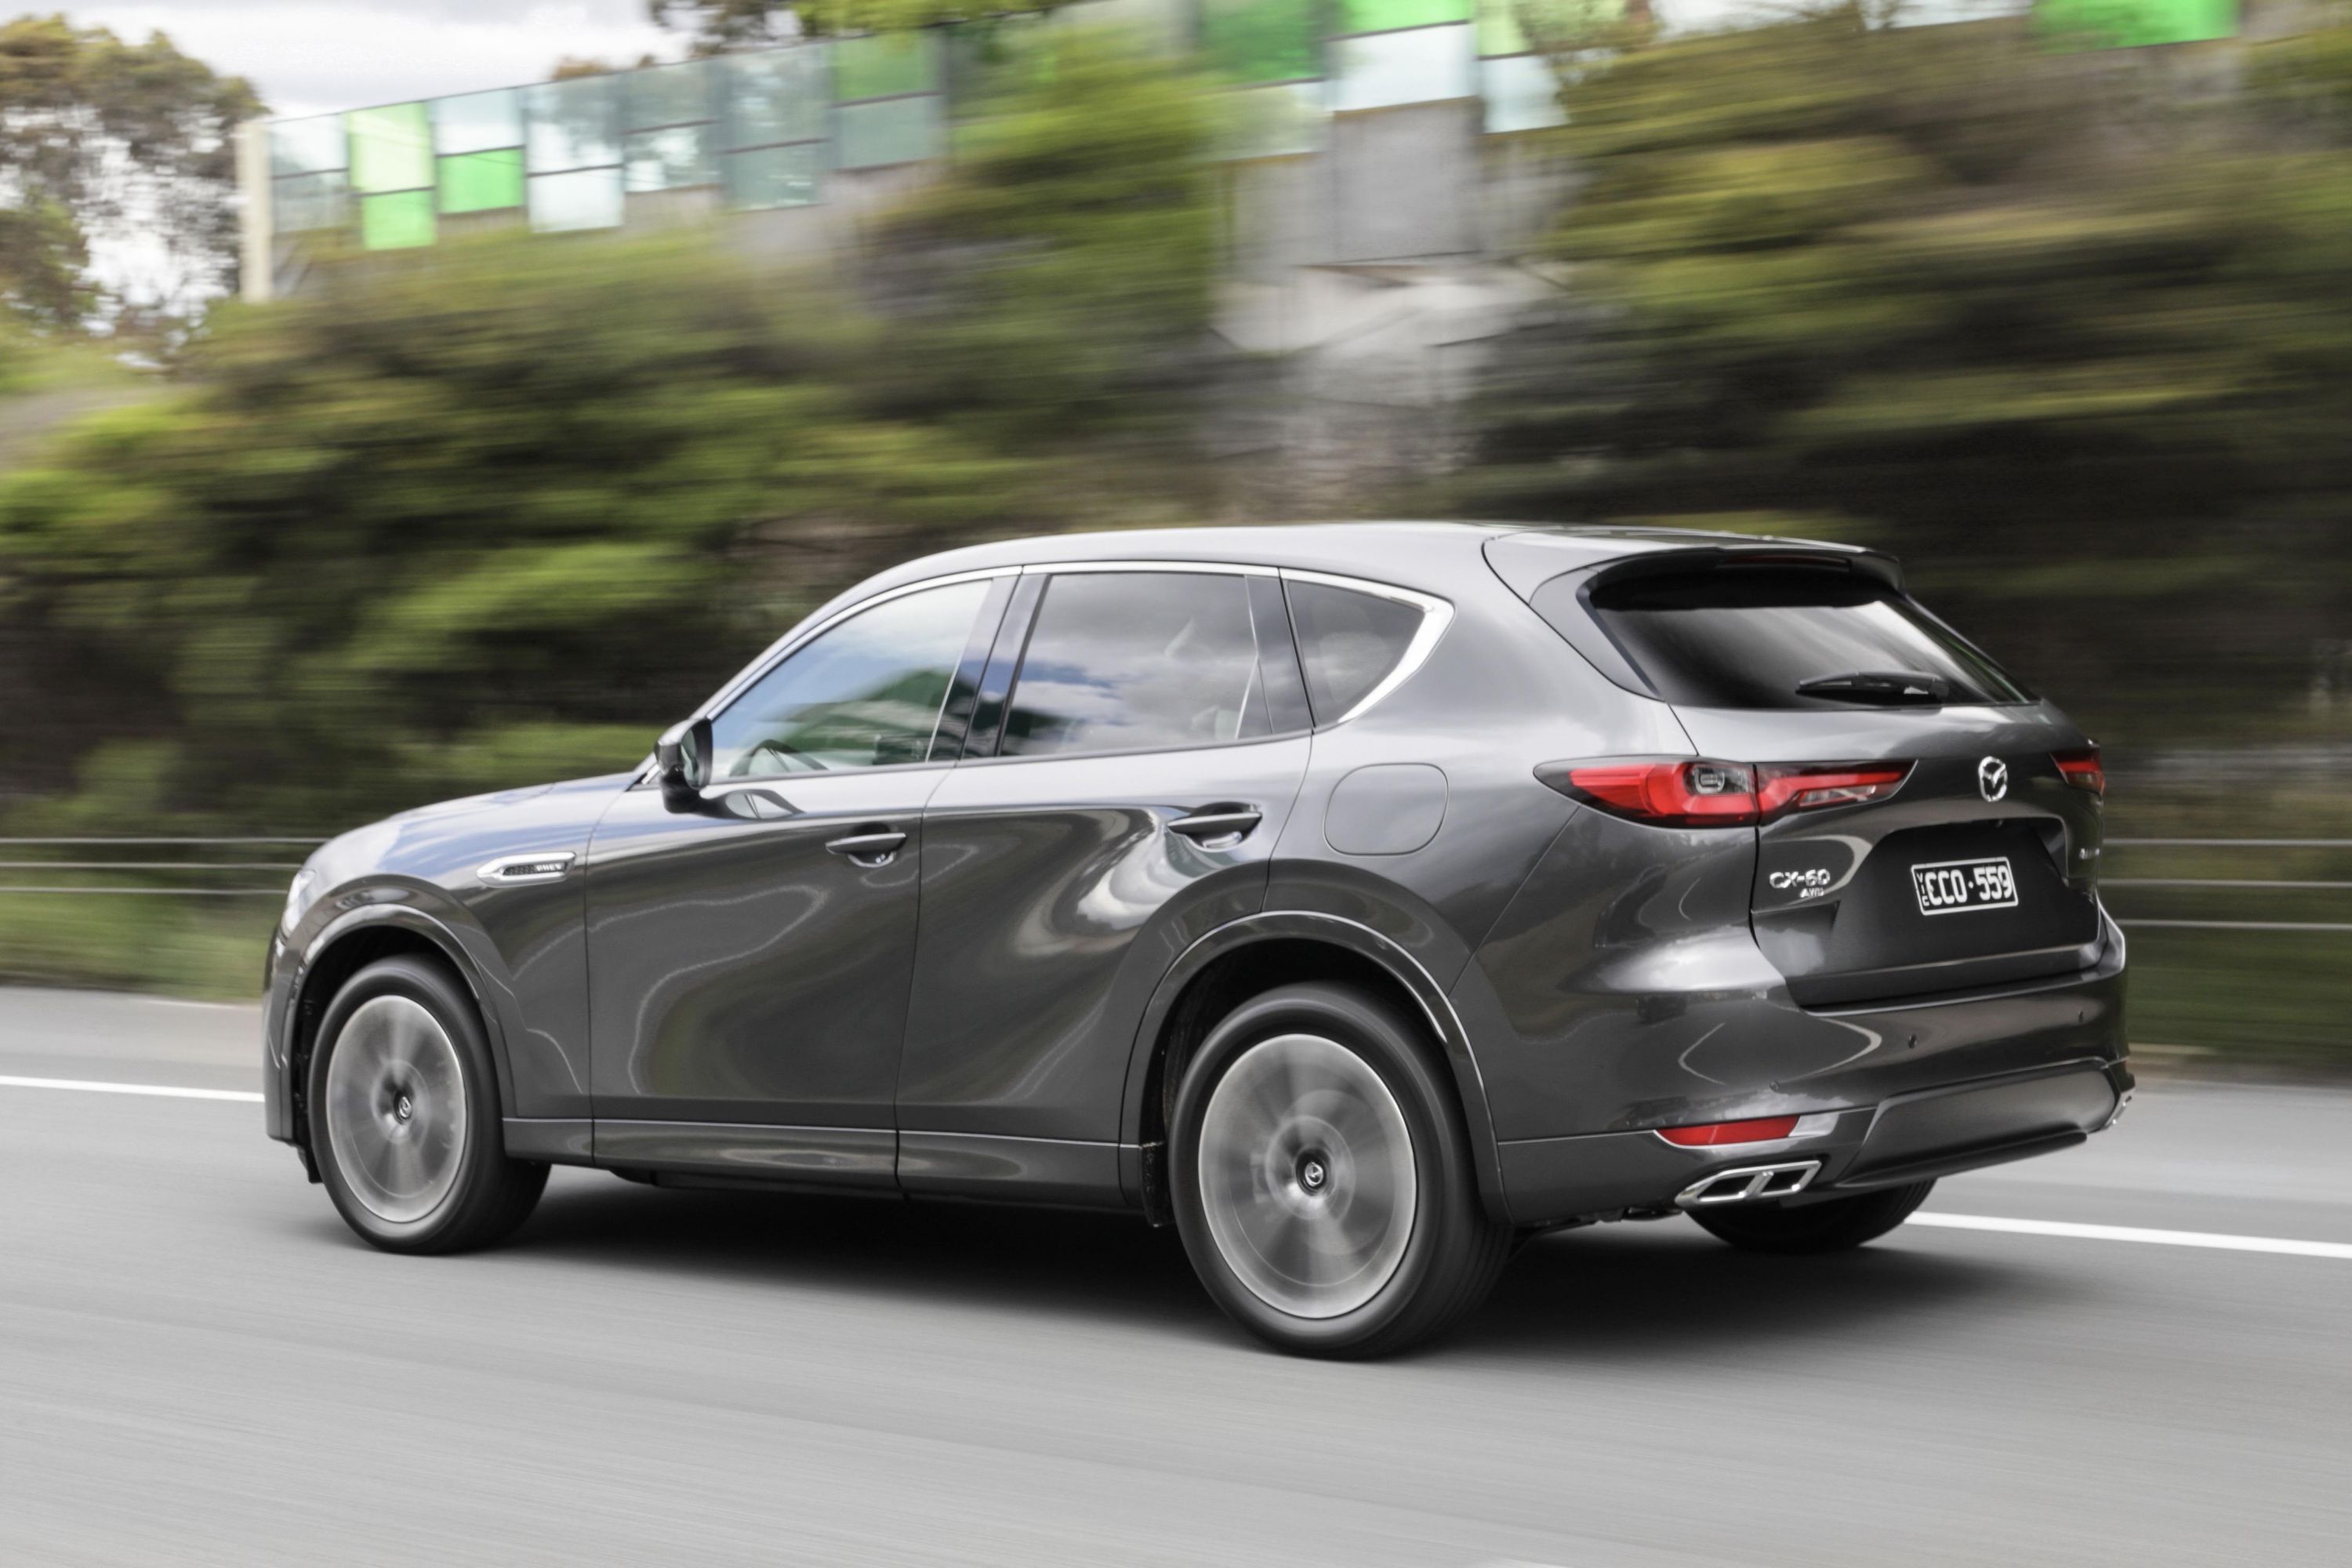 A New SUV From Mazda – CX-60 On Test